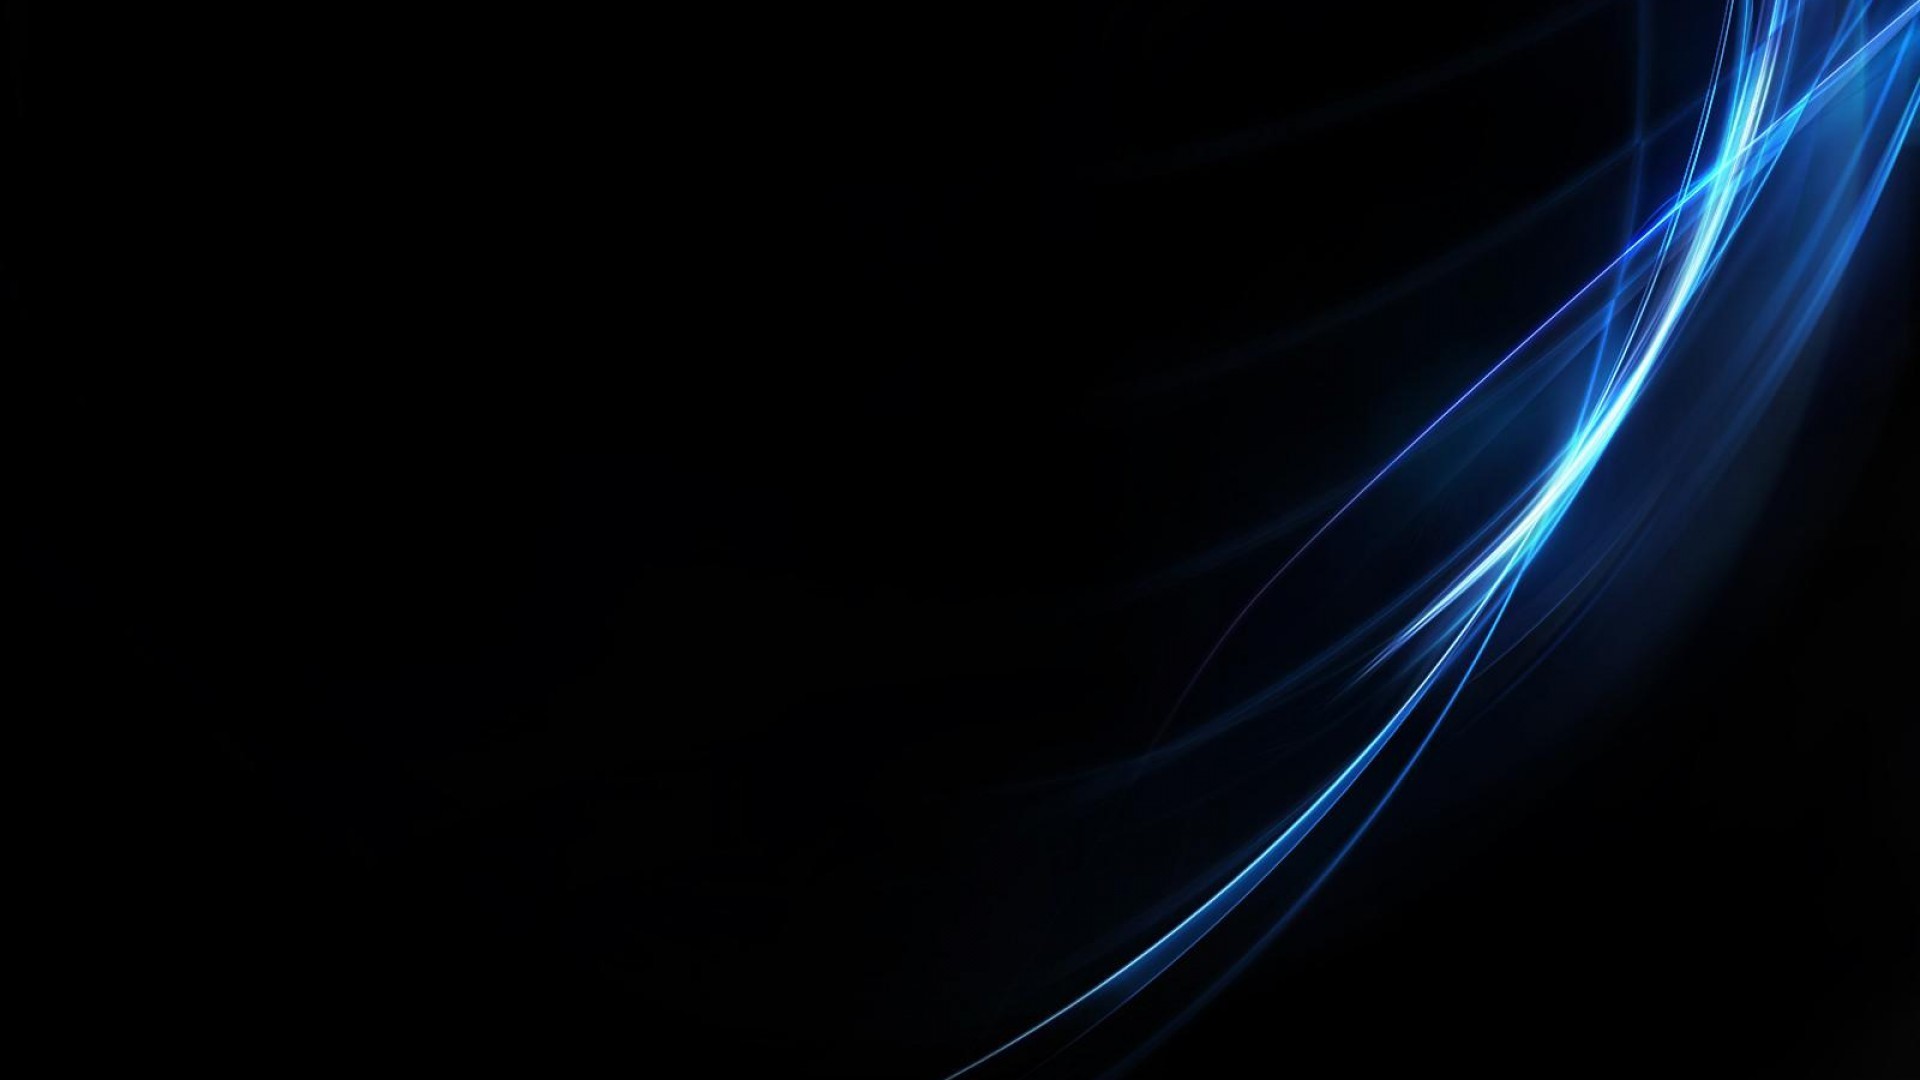 Blue abstract black wallpapers desktop 221826 | Black Background and .